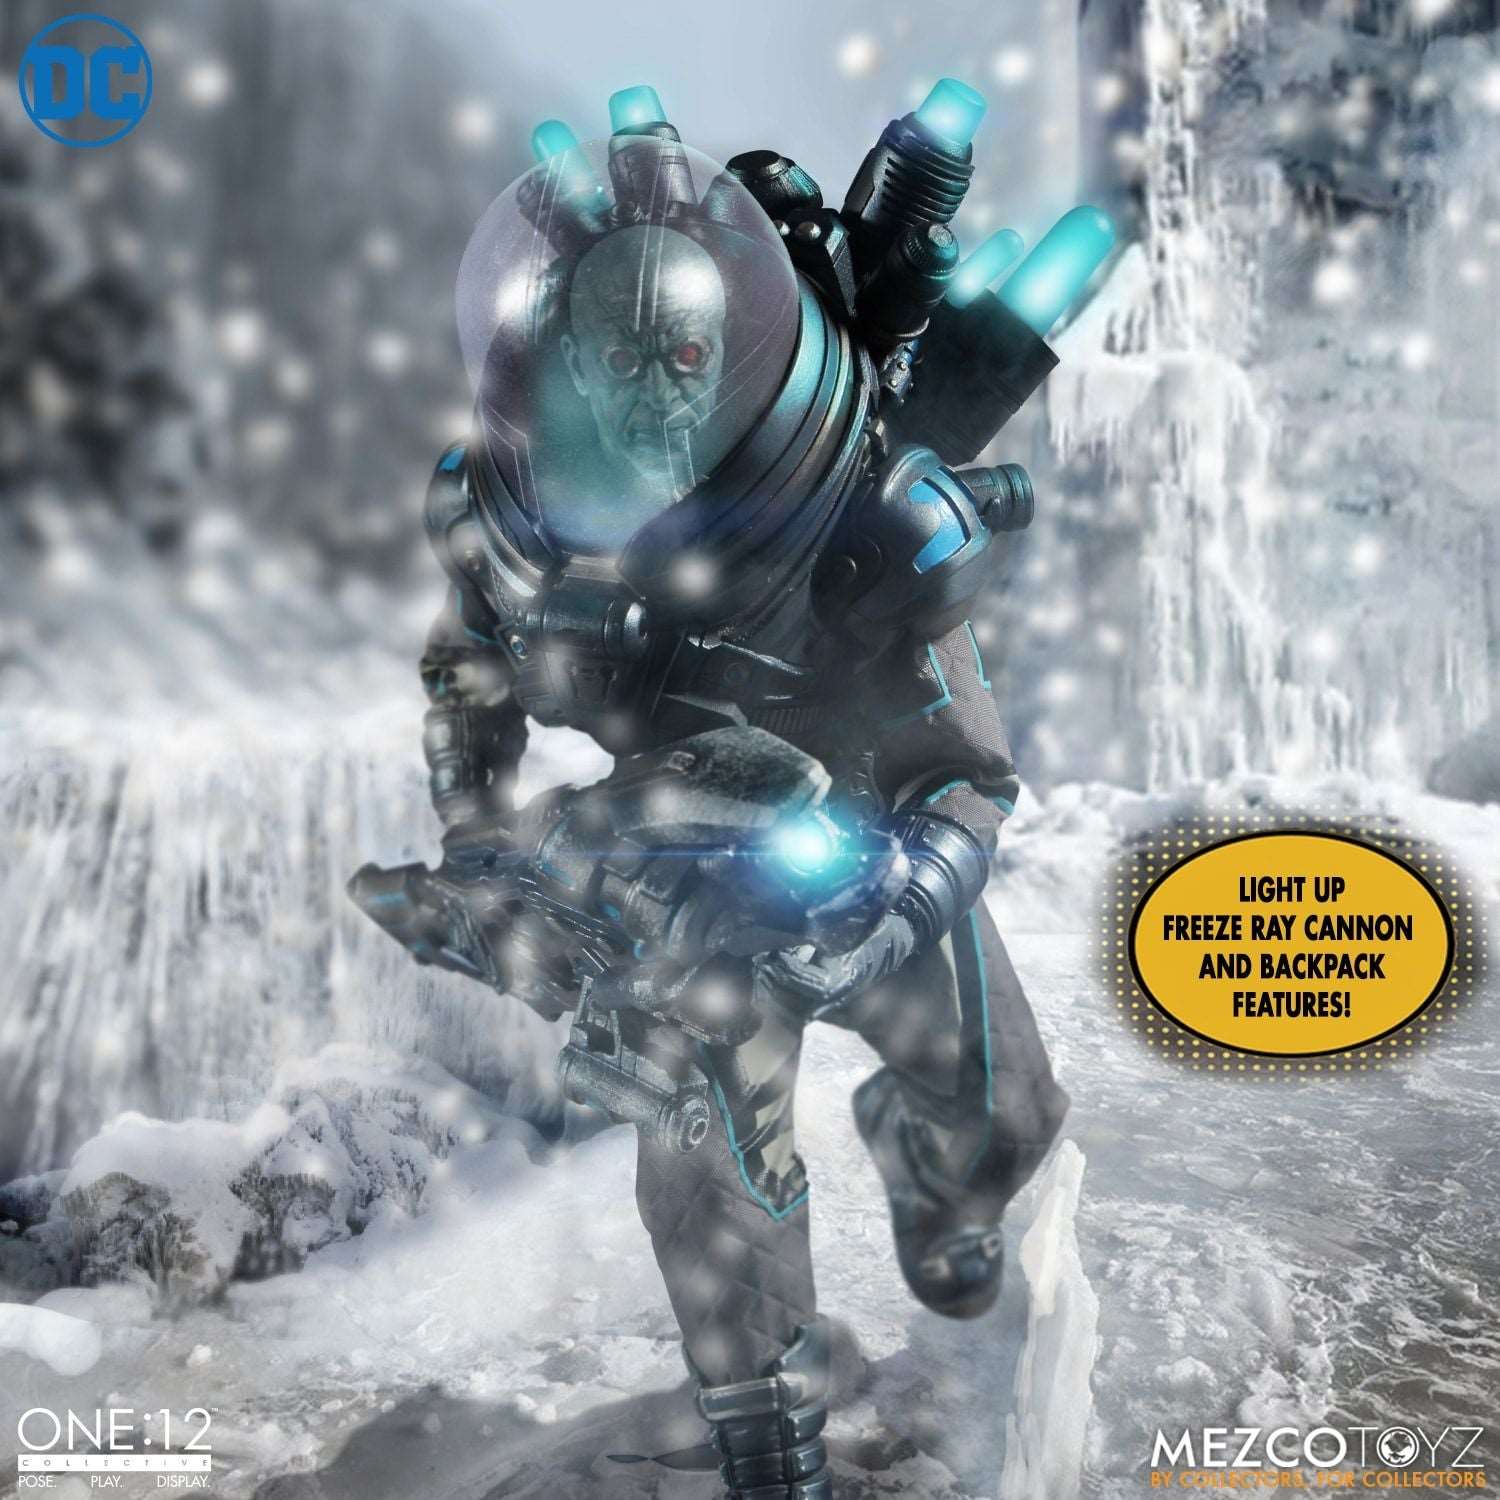 mezco one twelfth Mr. Freeze figure light up freeze ray cannon and backpack features